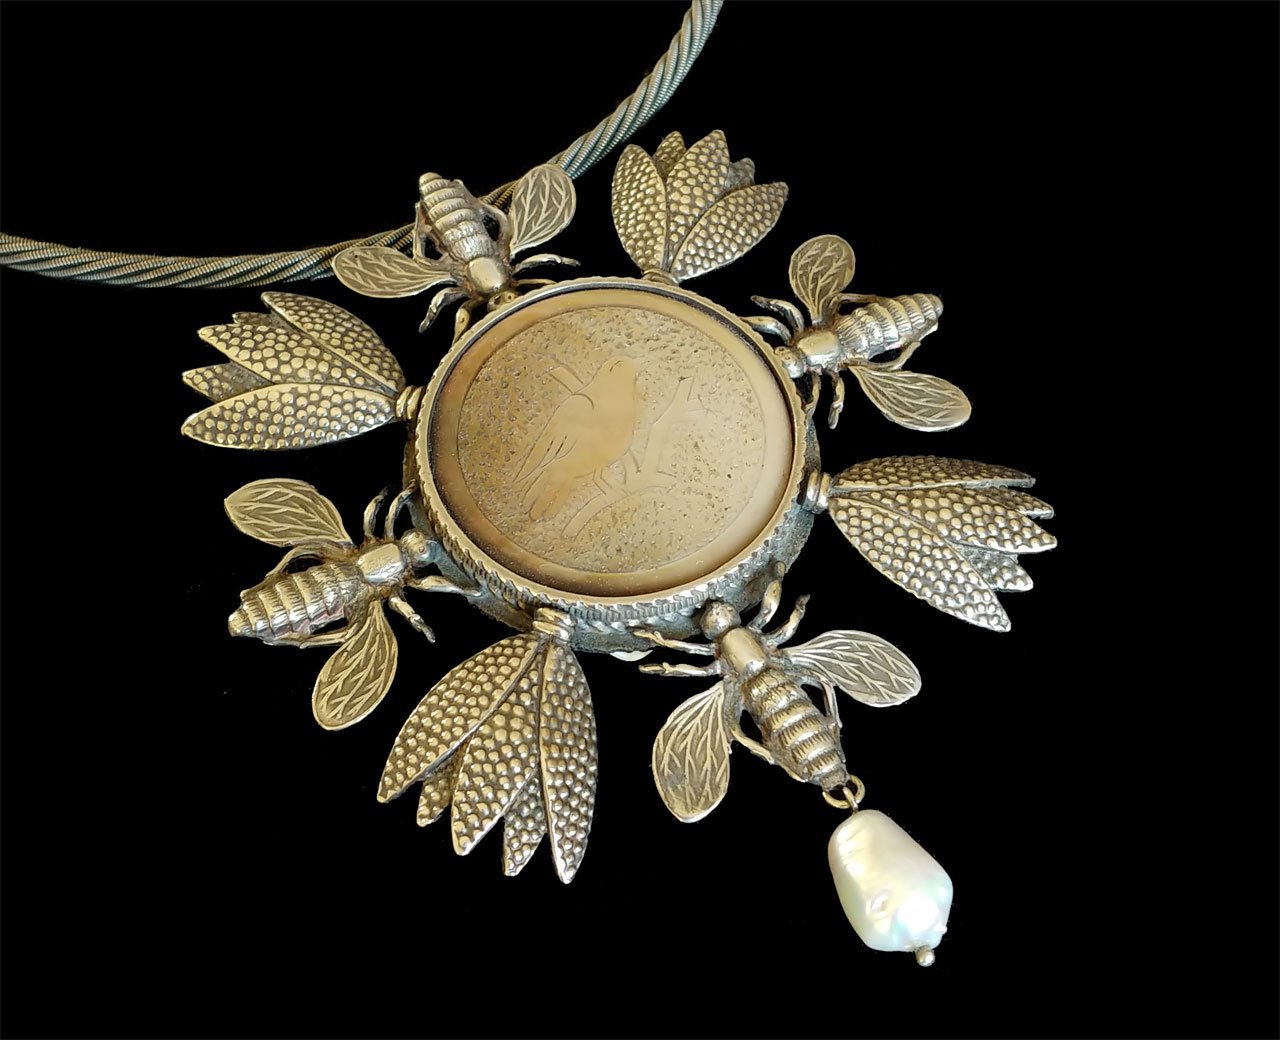   Beauty Surrounds You Pendant  of Chinese mother-of-pearl gambling chip, silver cord, sterling silver, pearl; lost wax cast, formed, fabricated, soldered. 